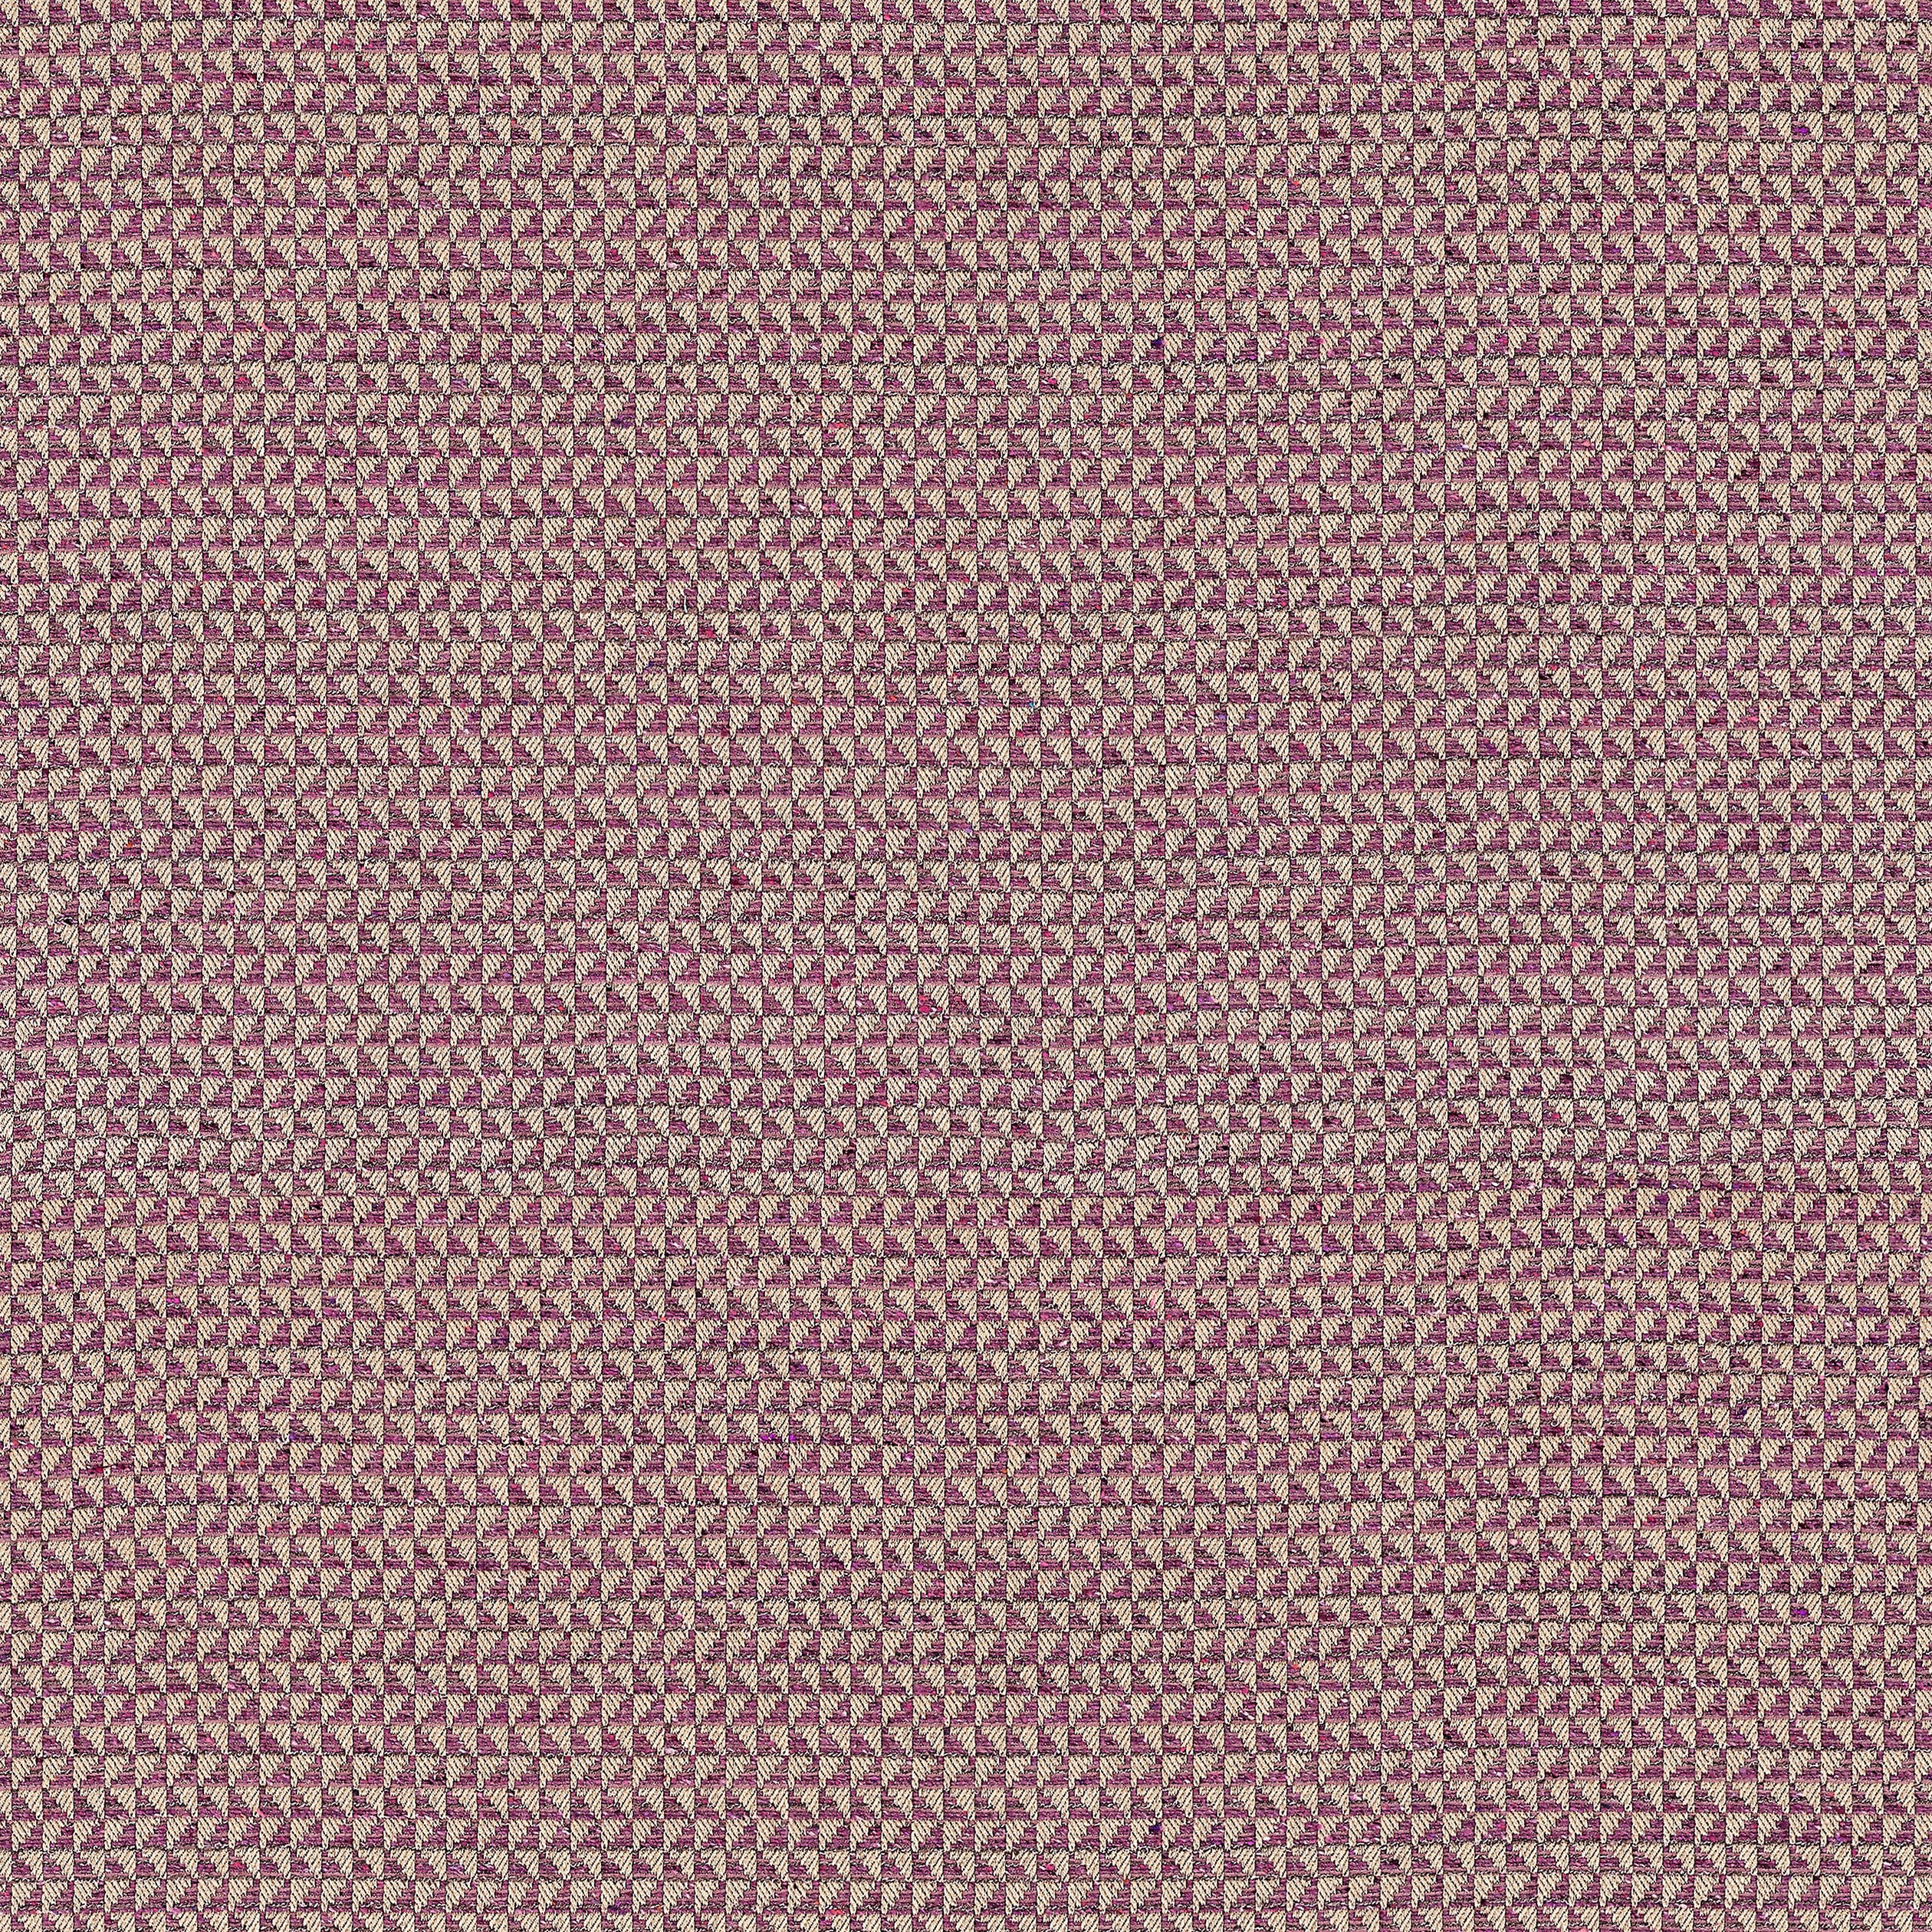 Pollux fabric in mulberry color - pattern number W81908 - by Thibaut in the Companions collection